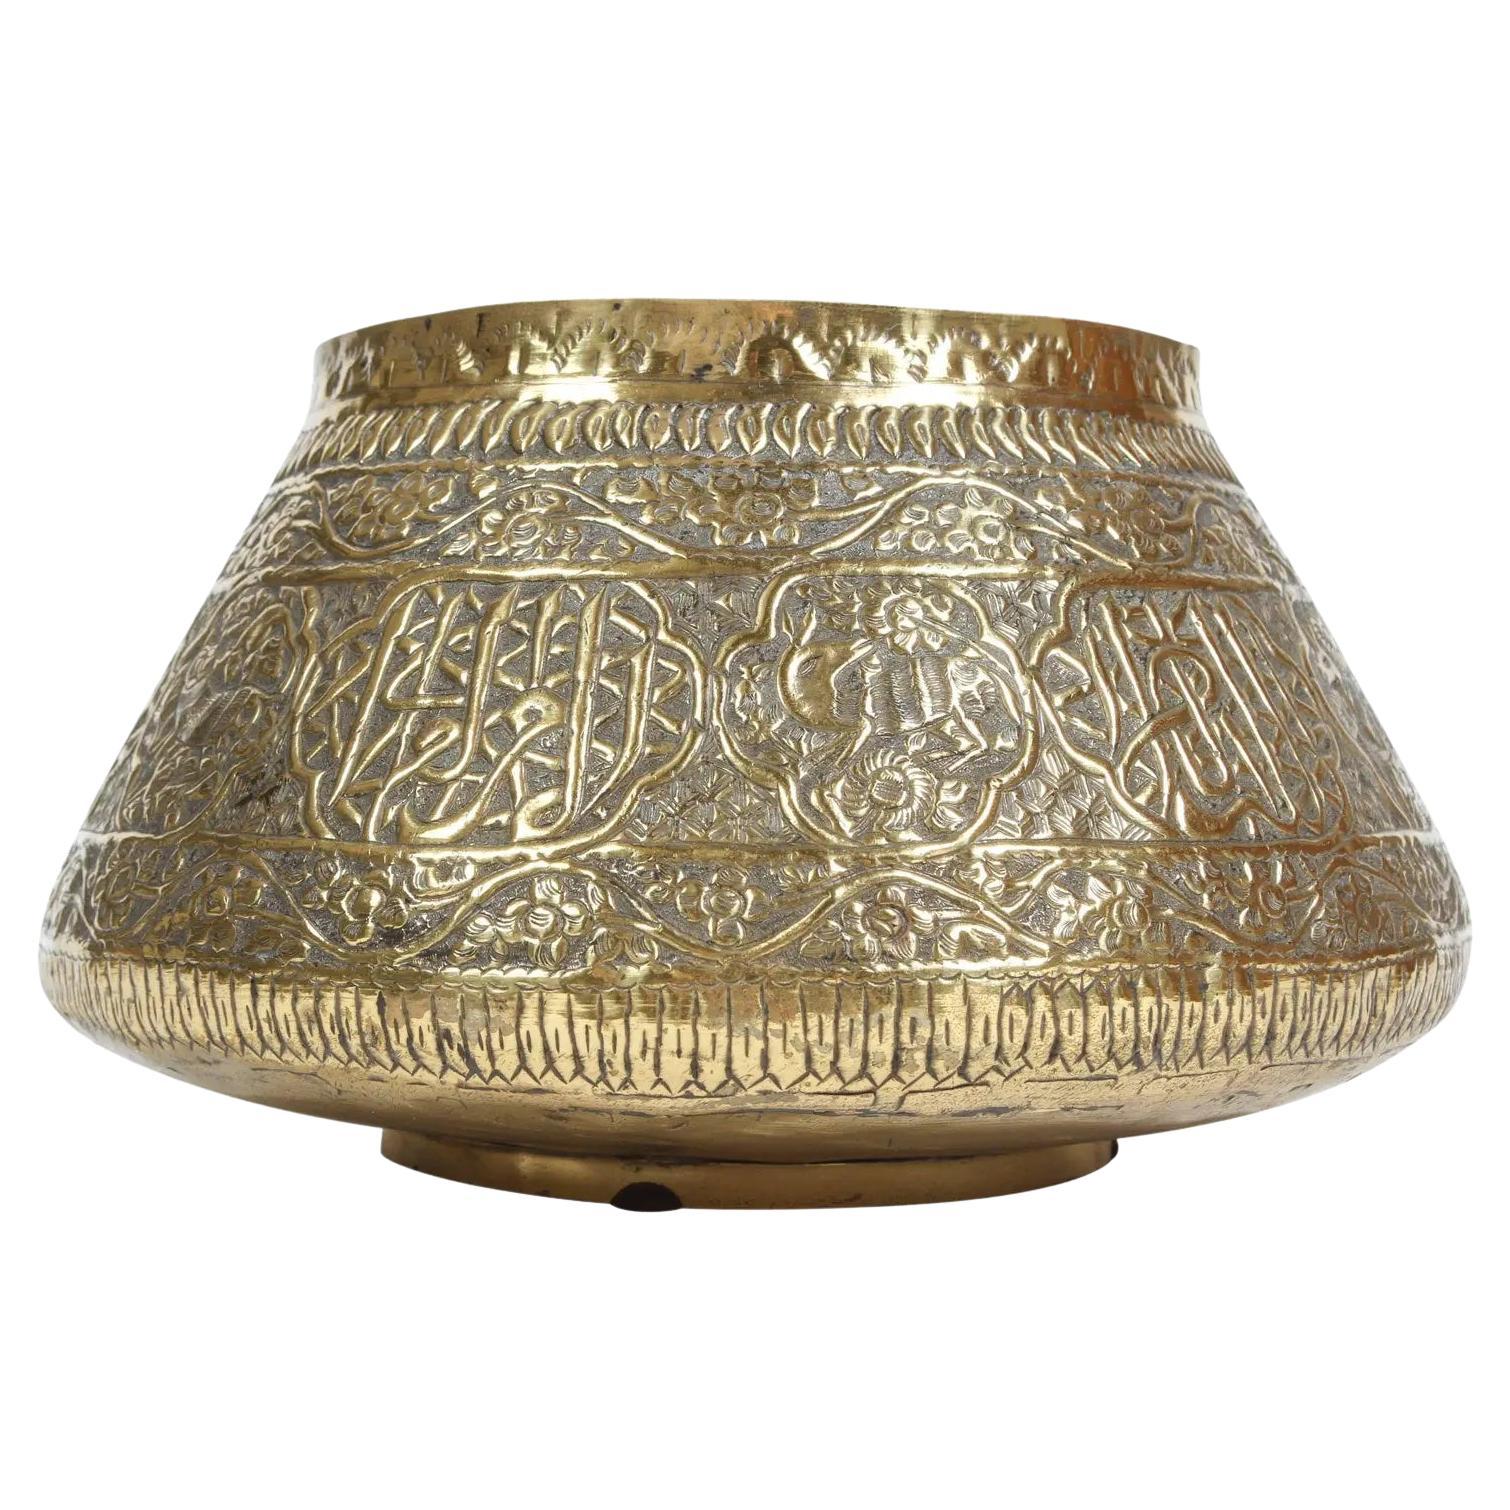 Middle Eastern Brass Bowl with Arabic Calligraphy Writing For Sale